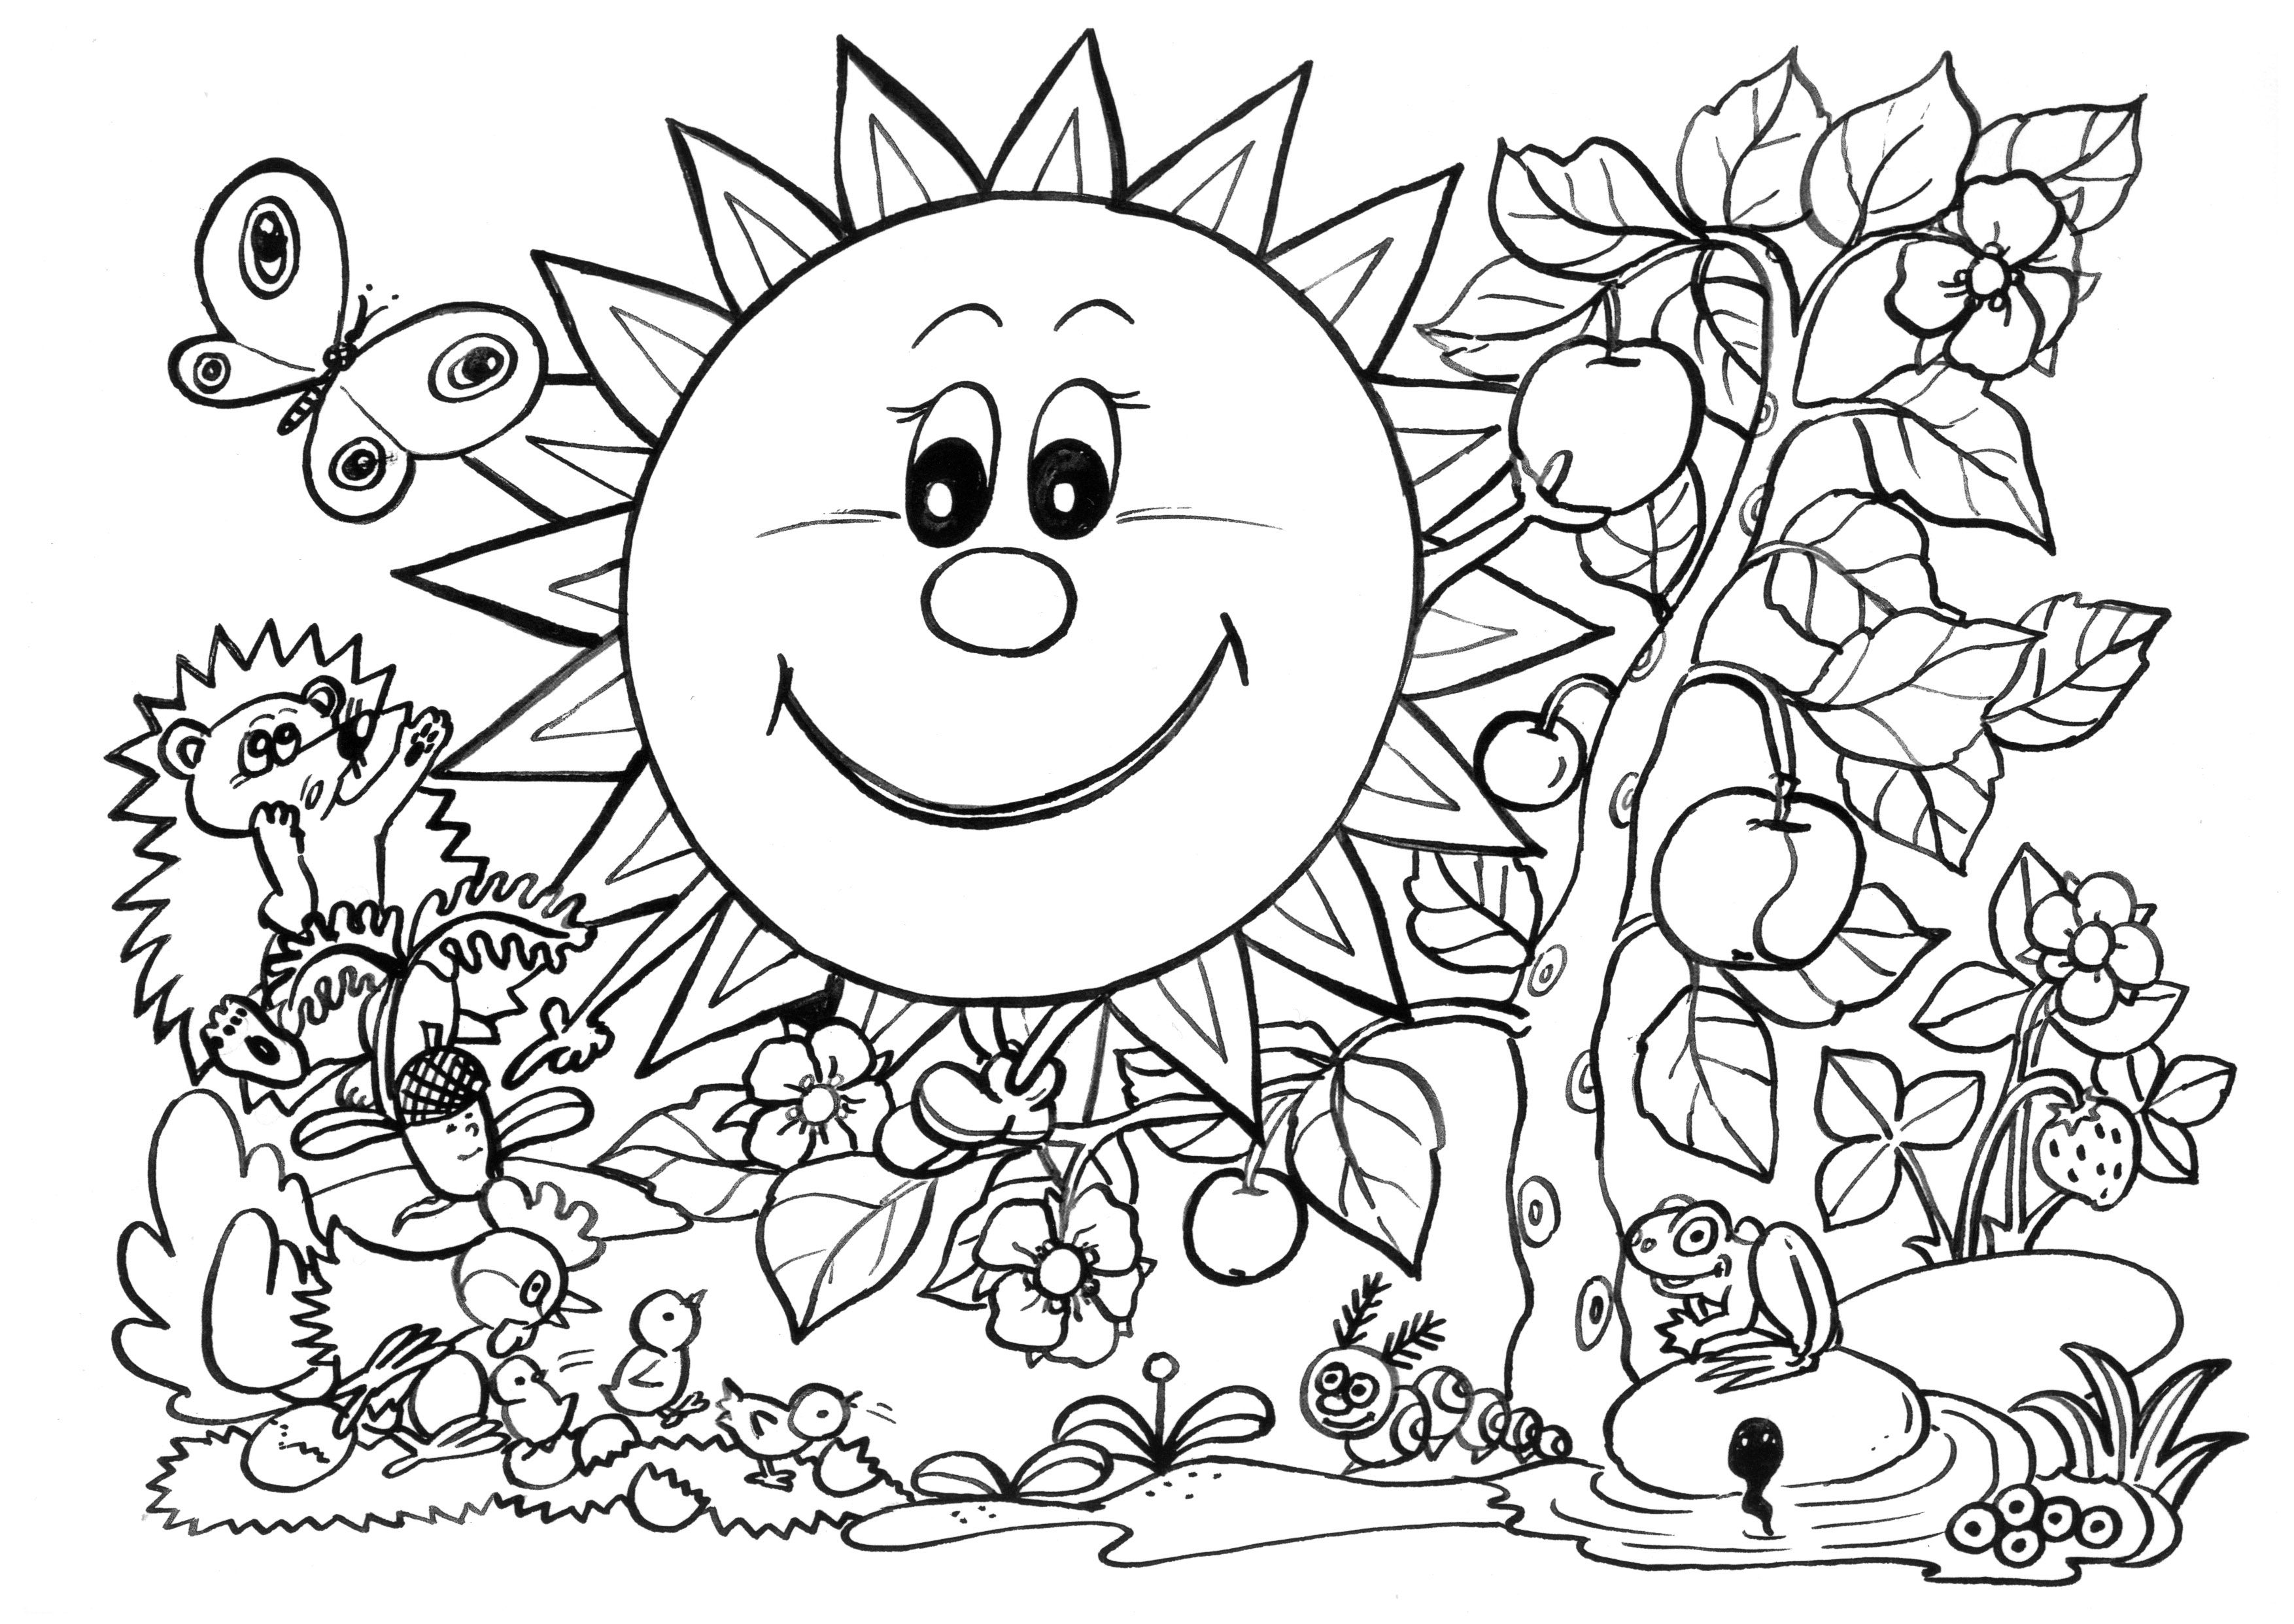 Springtime Coloring Pages 20 Pictures   Colorine.net   20 ...